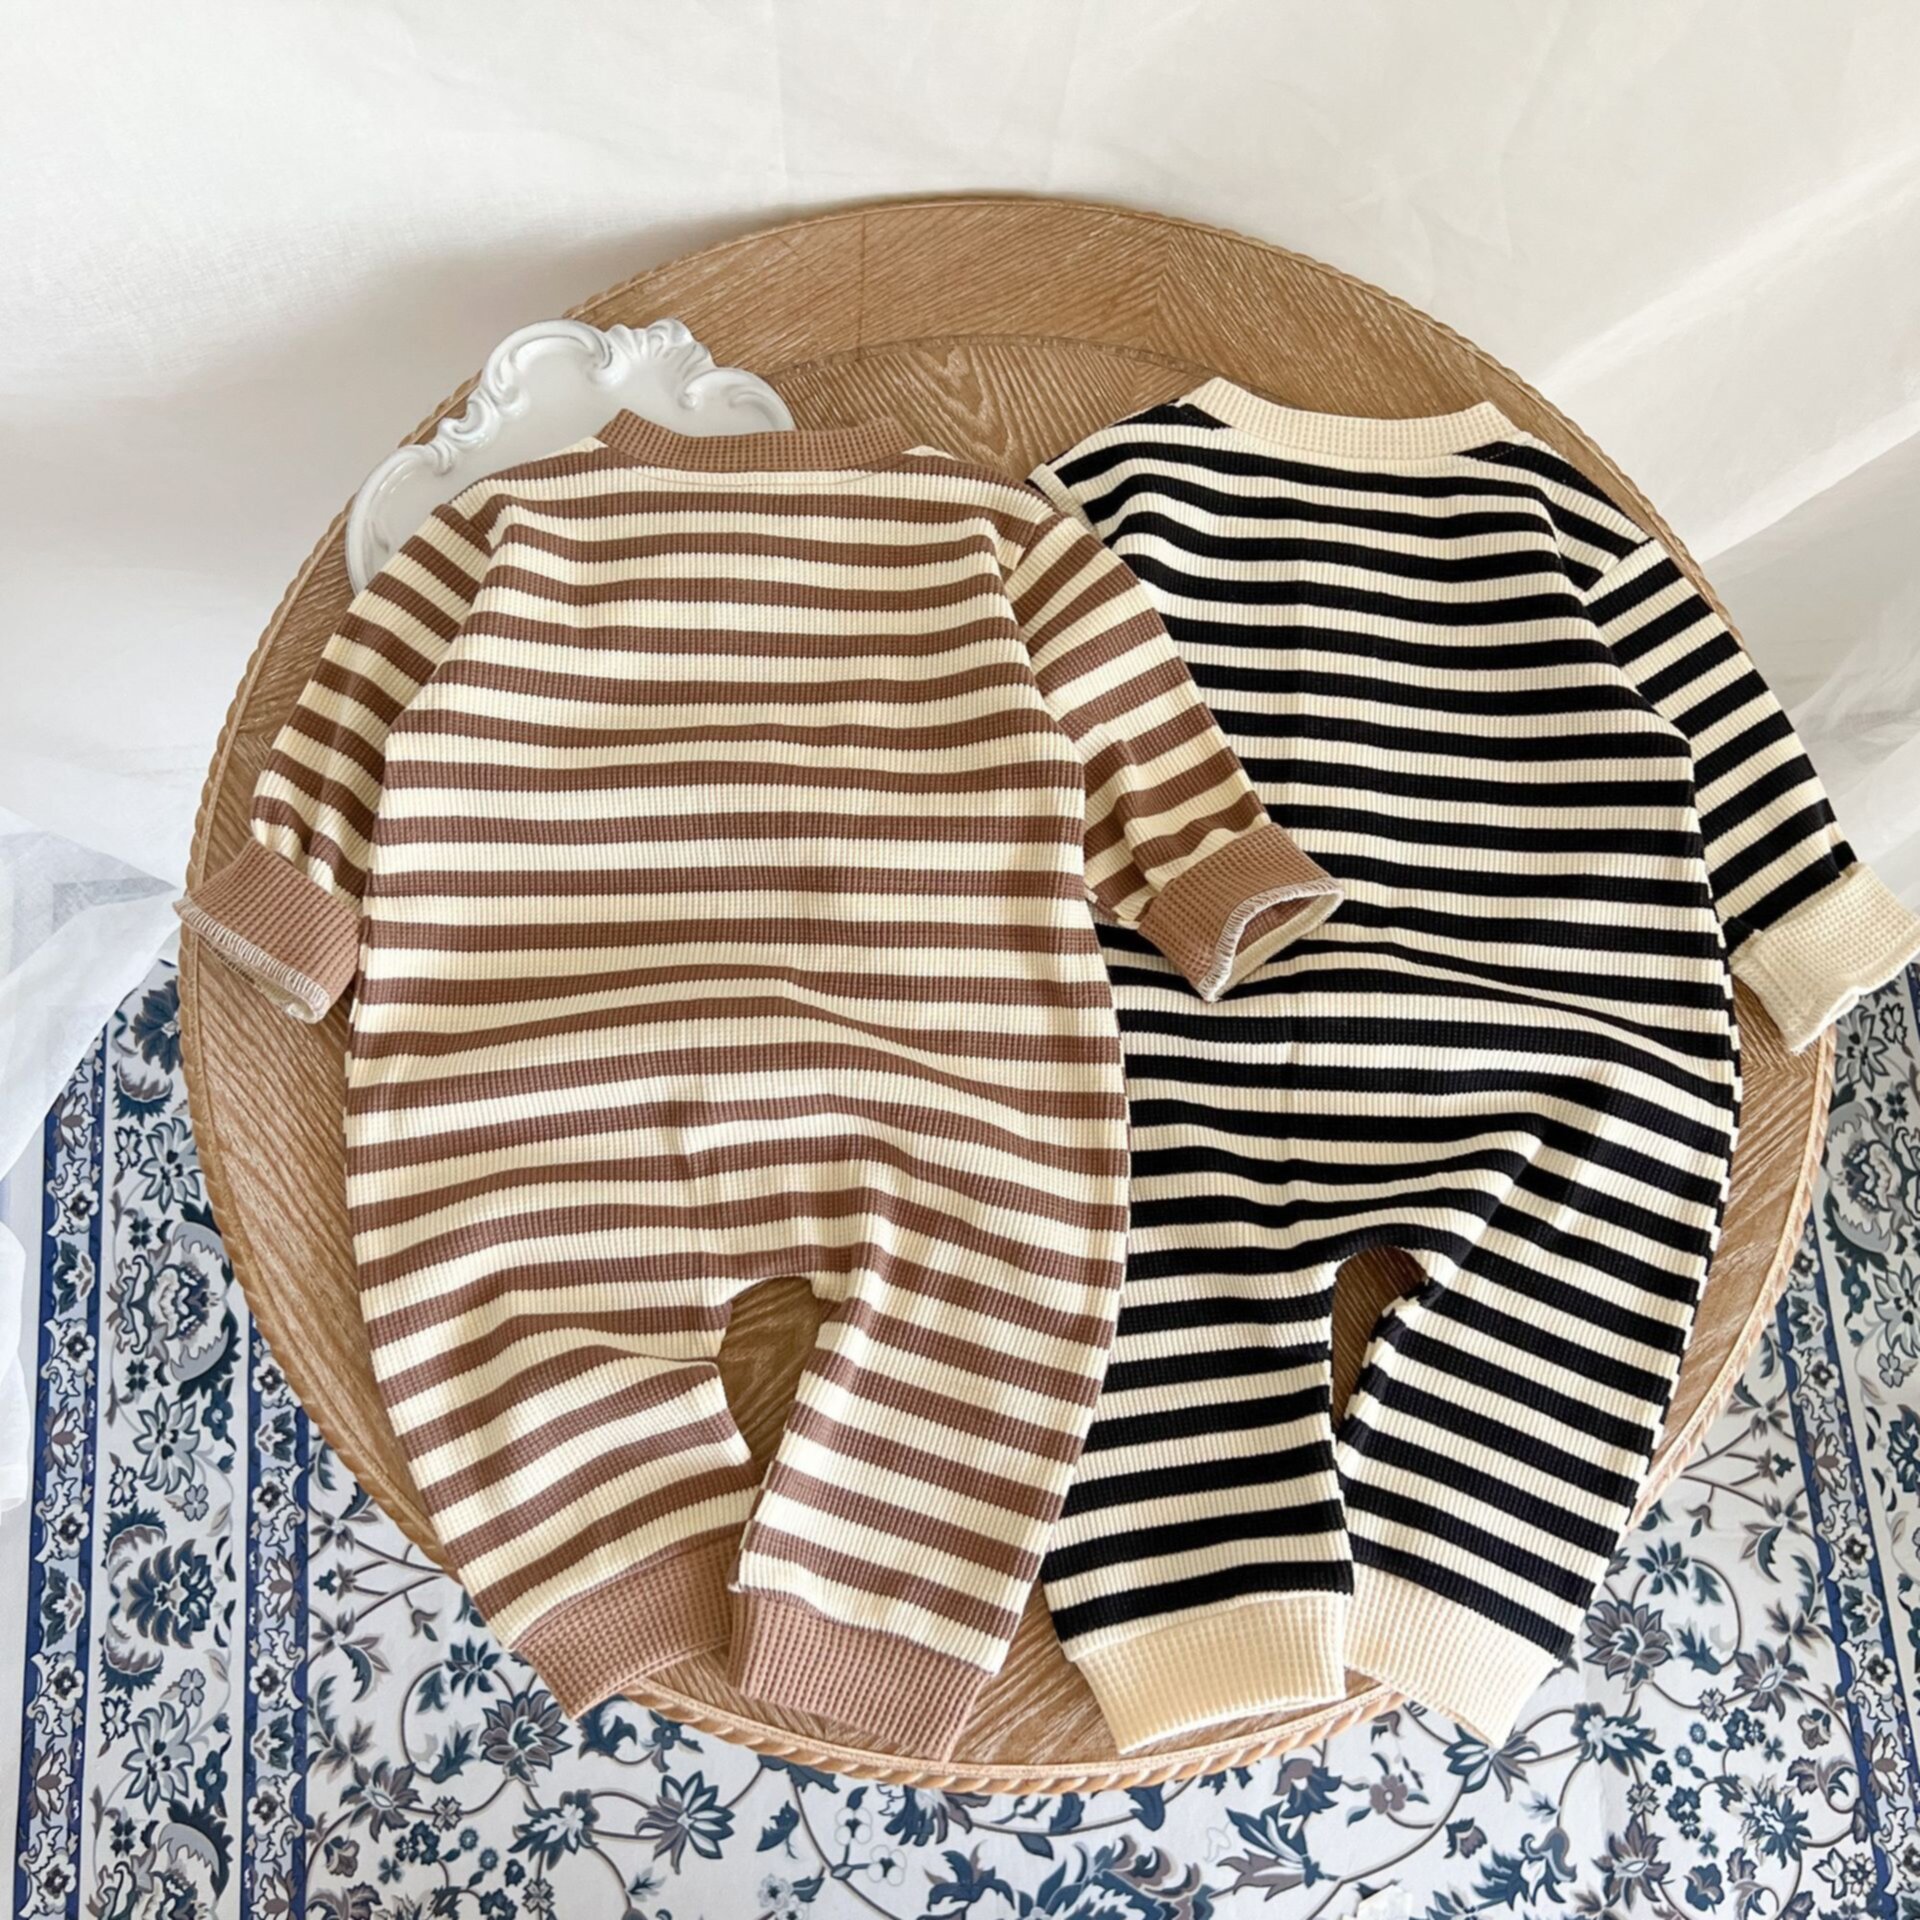 Autumn new striped baby crawling outfits manufacturer